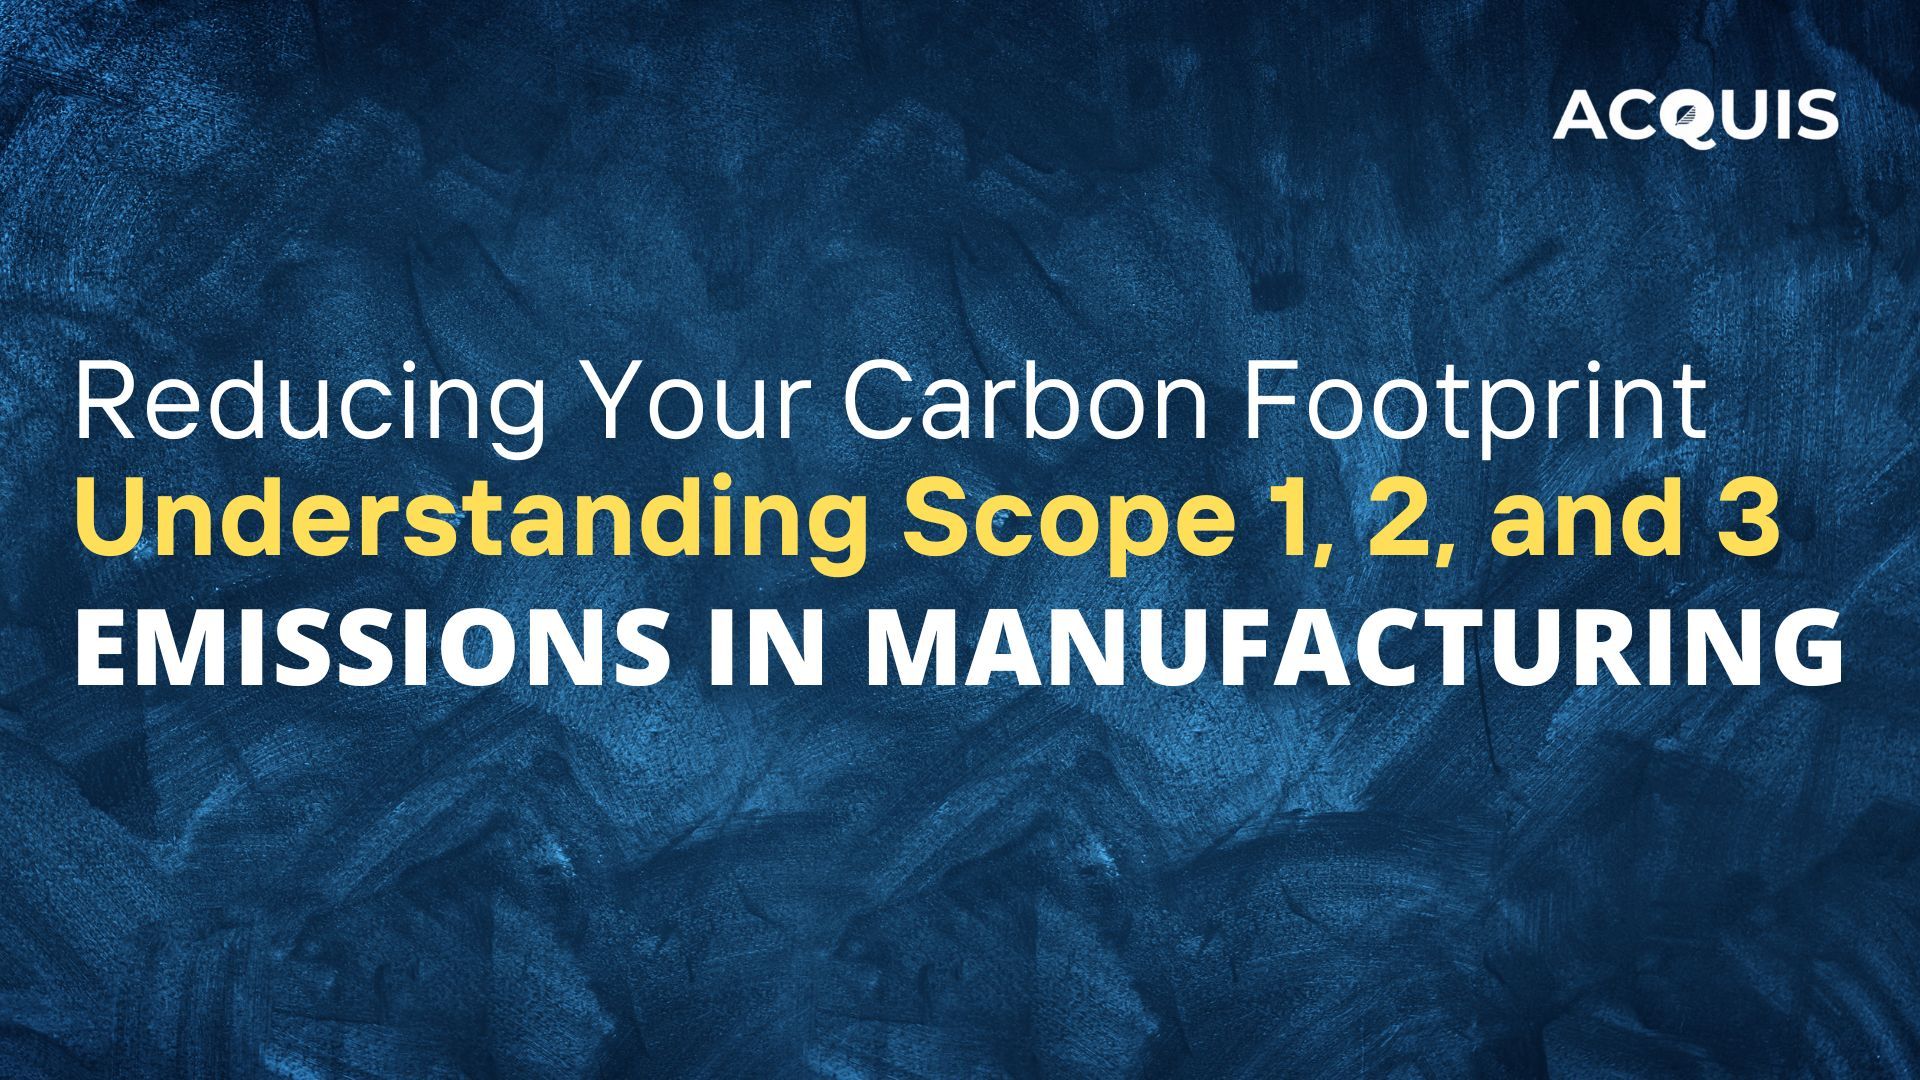 Reducing Your Carbon Footprint: Understanding Scope 1, 2, and 3 Emissions in Manufacturing